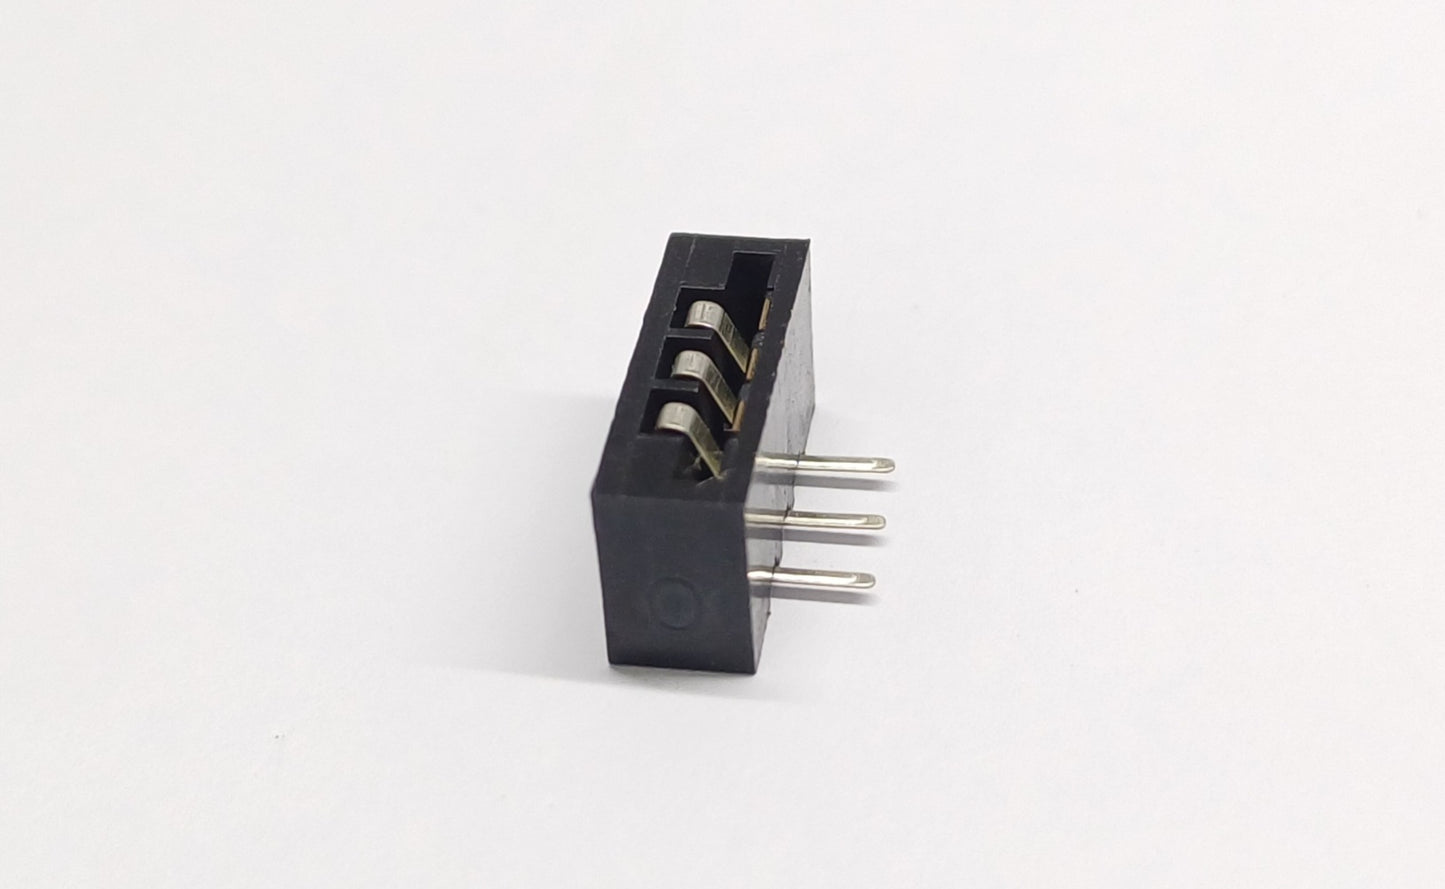 Bare SPE Connector 2.54mm Pin Pitch